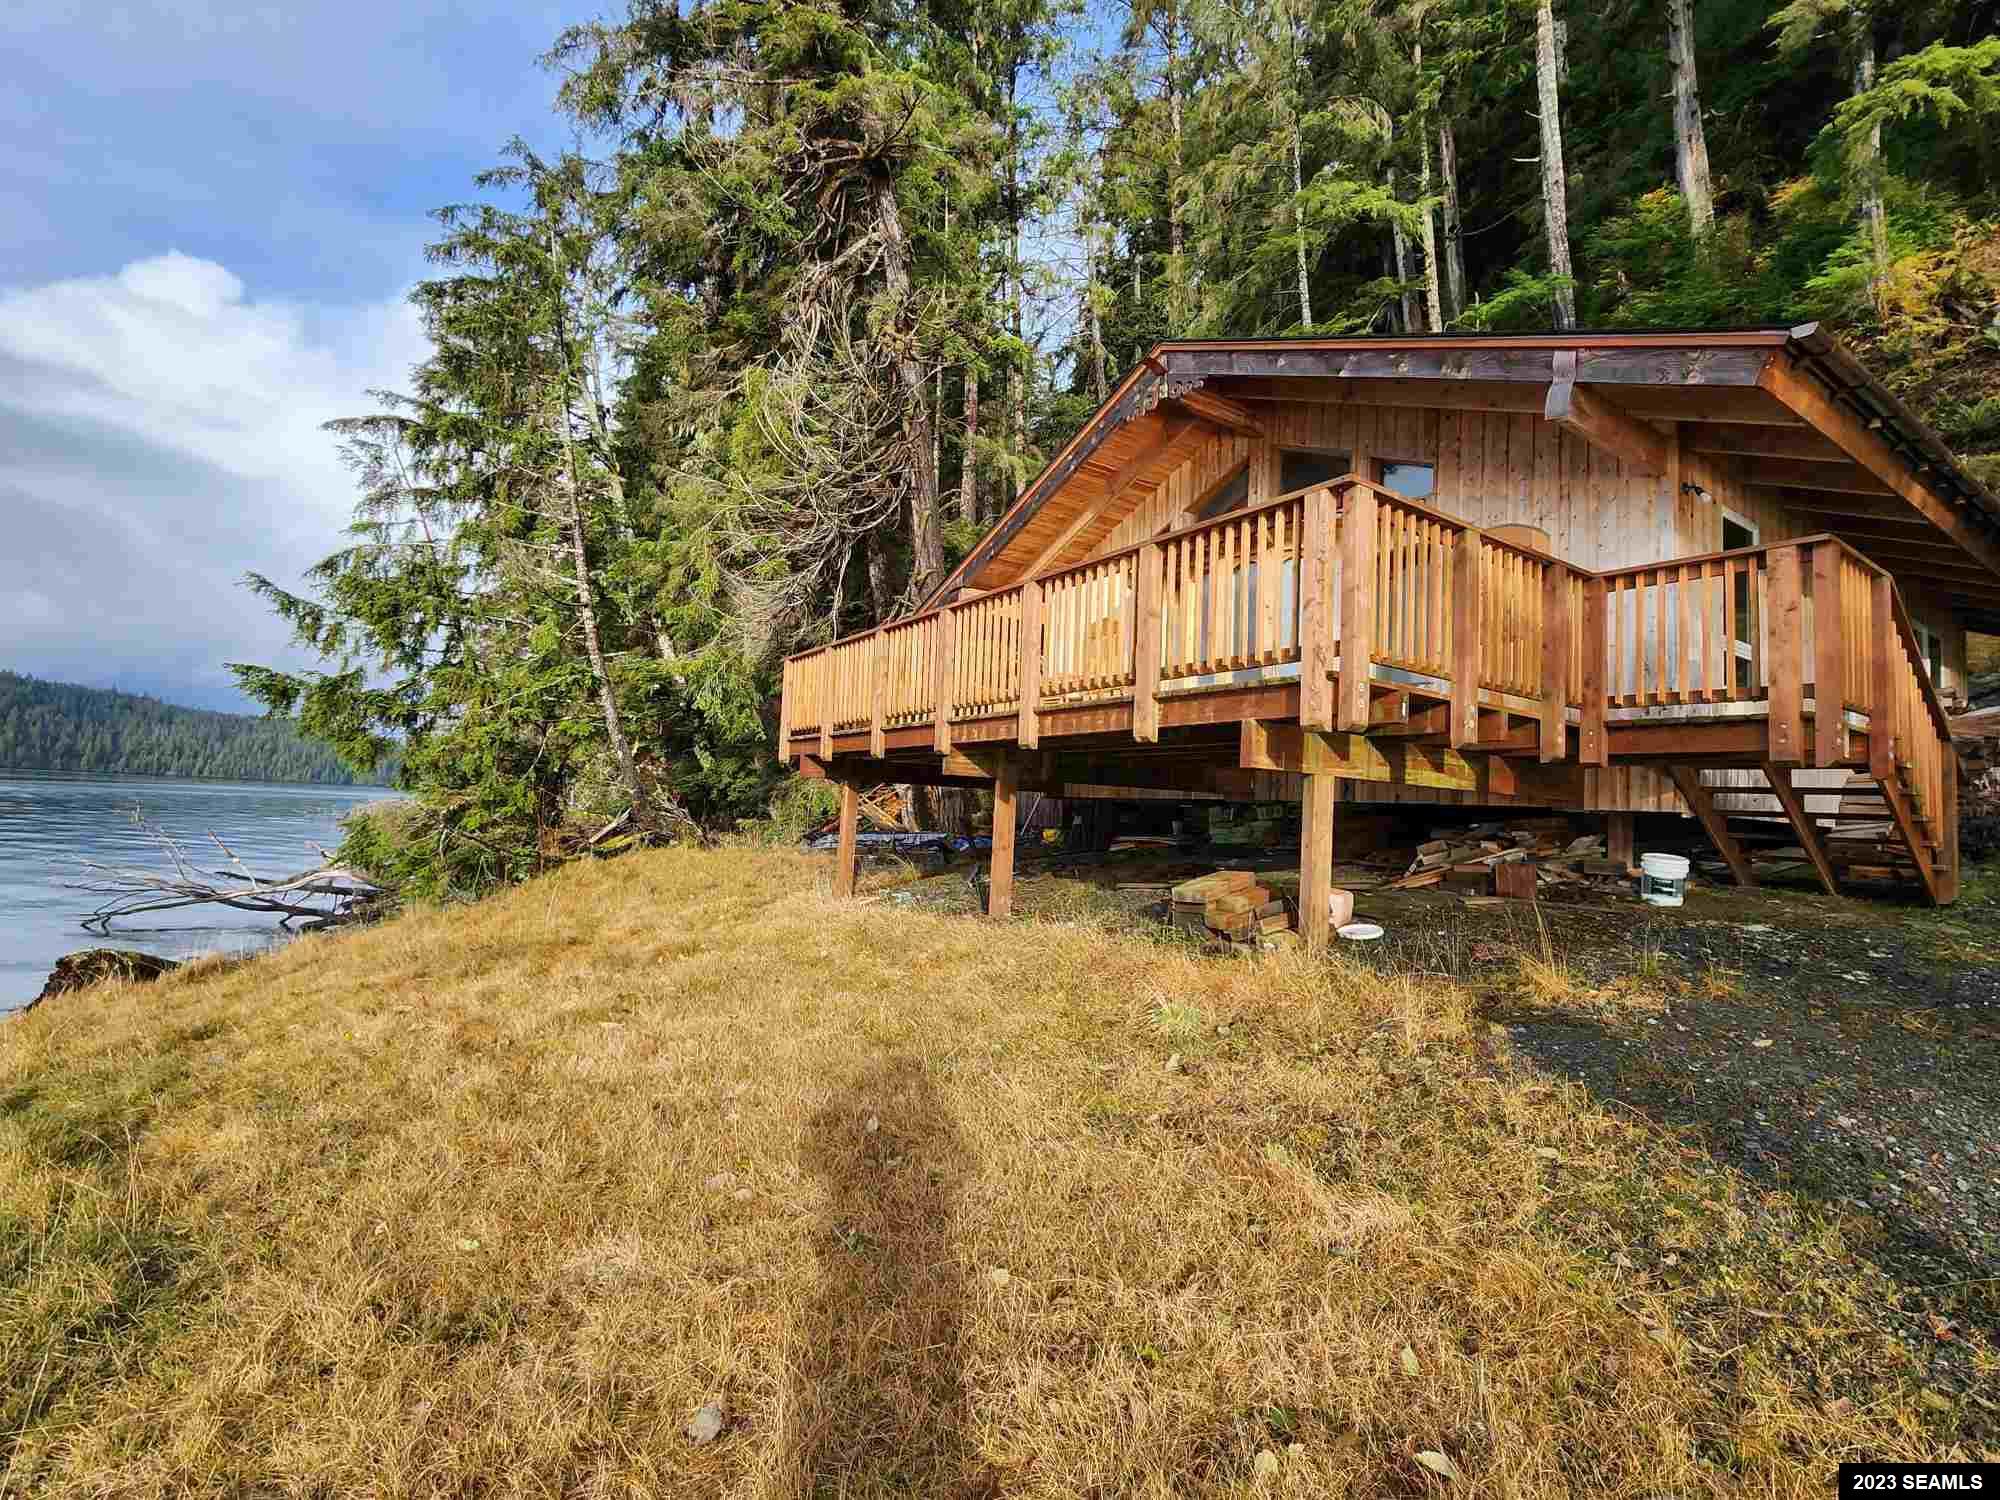 NHN No Street Given, Ketchikan, AK 99901, 2 Bedrooms Bedrooms, ,1 BathroomBathrooms,Residential,For Sale,No Street Given,23774